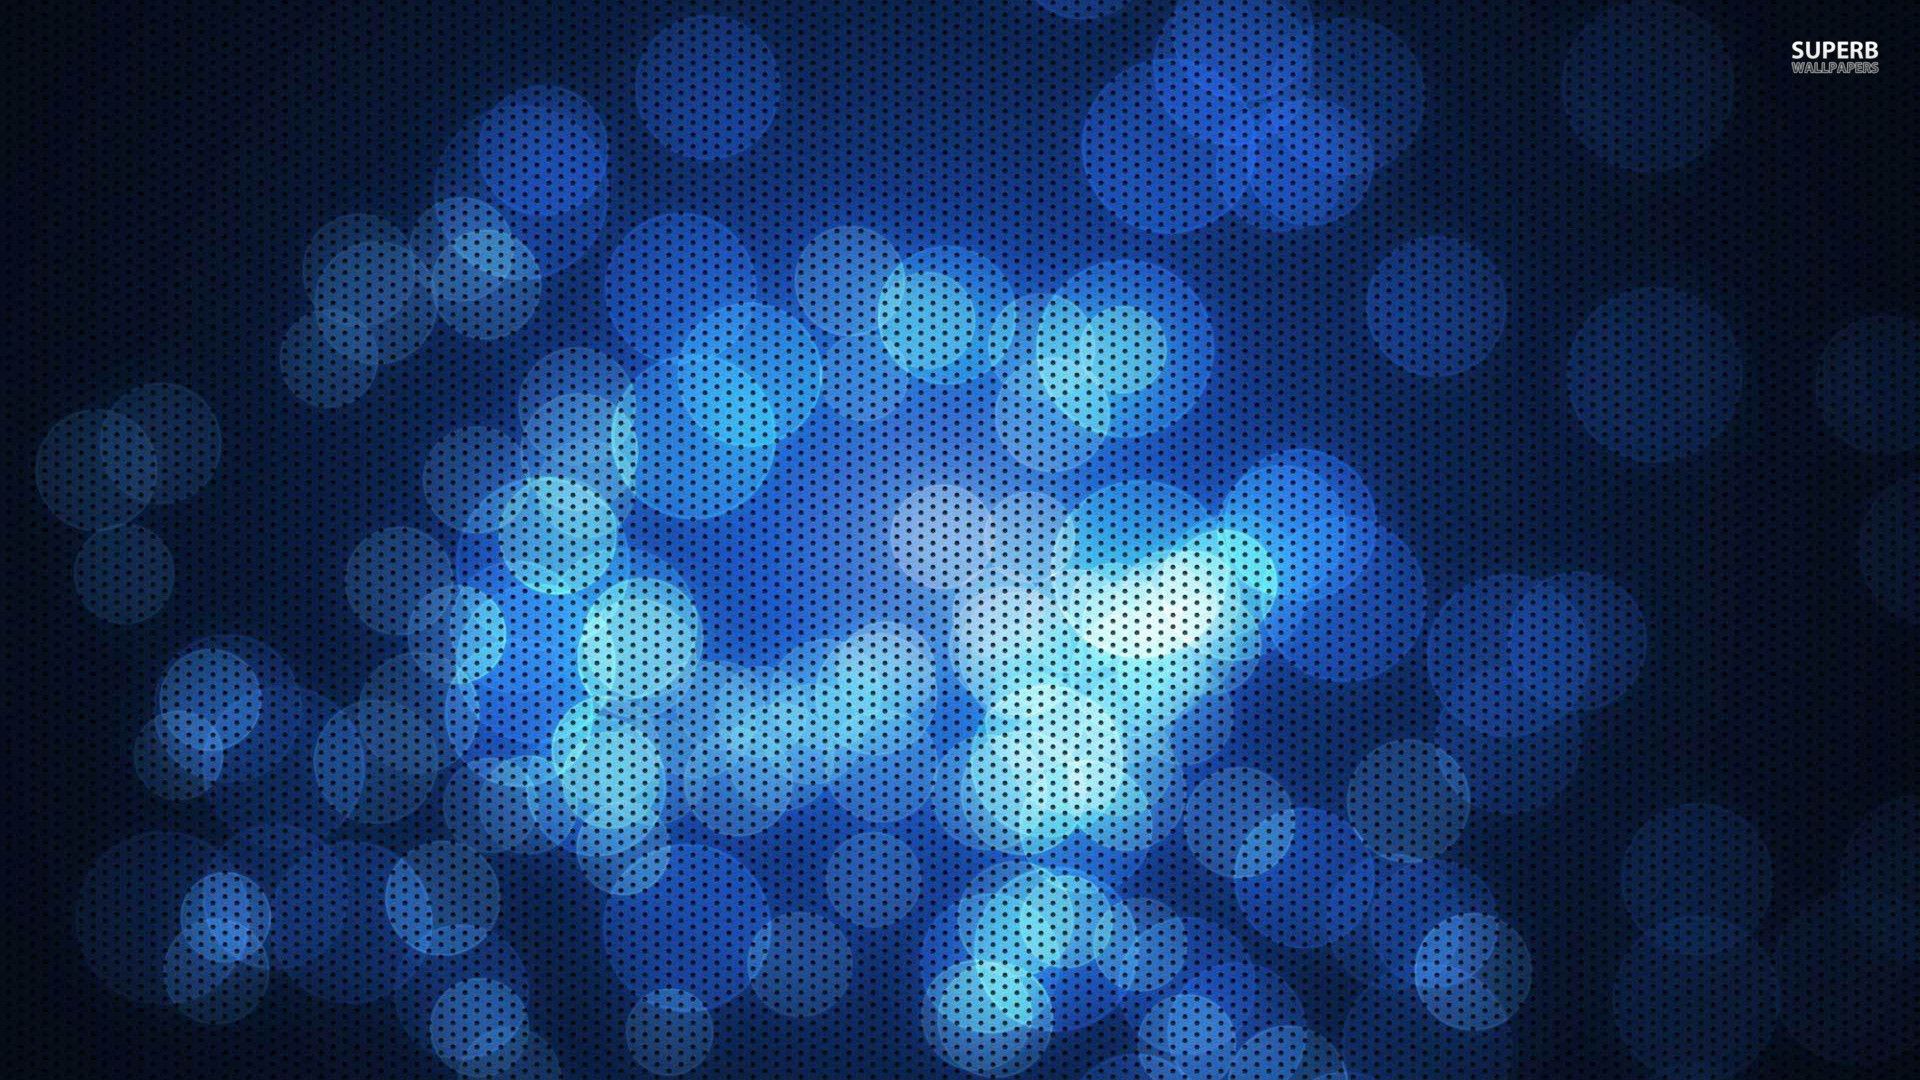 Drill wall with blue circles wallpaper   Abstract wallpapers